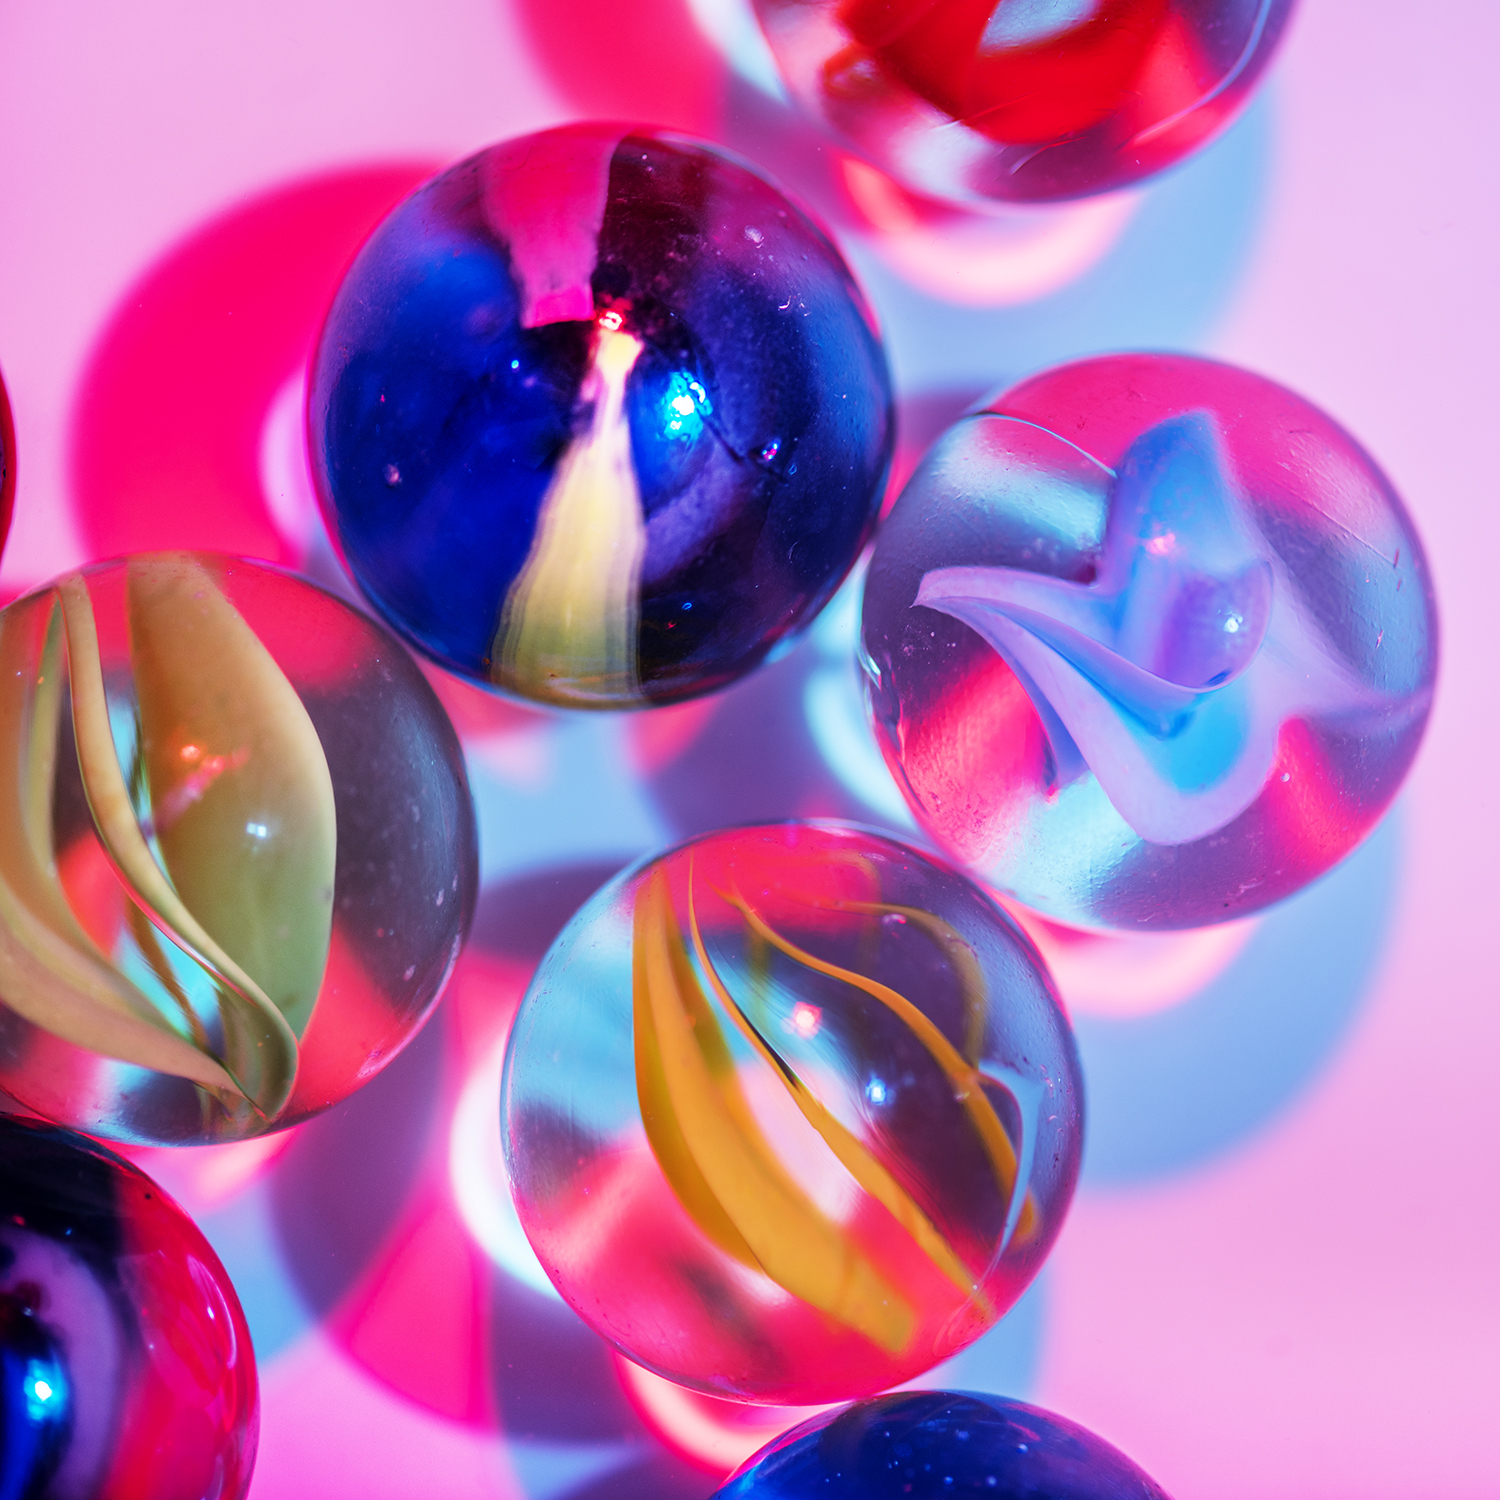 Colorful marbles on a pink surface